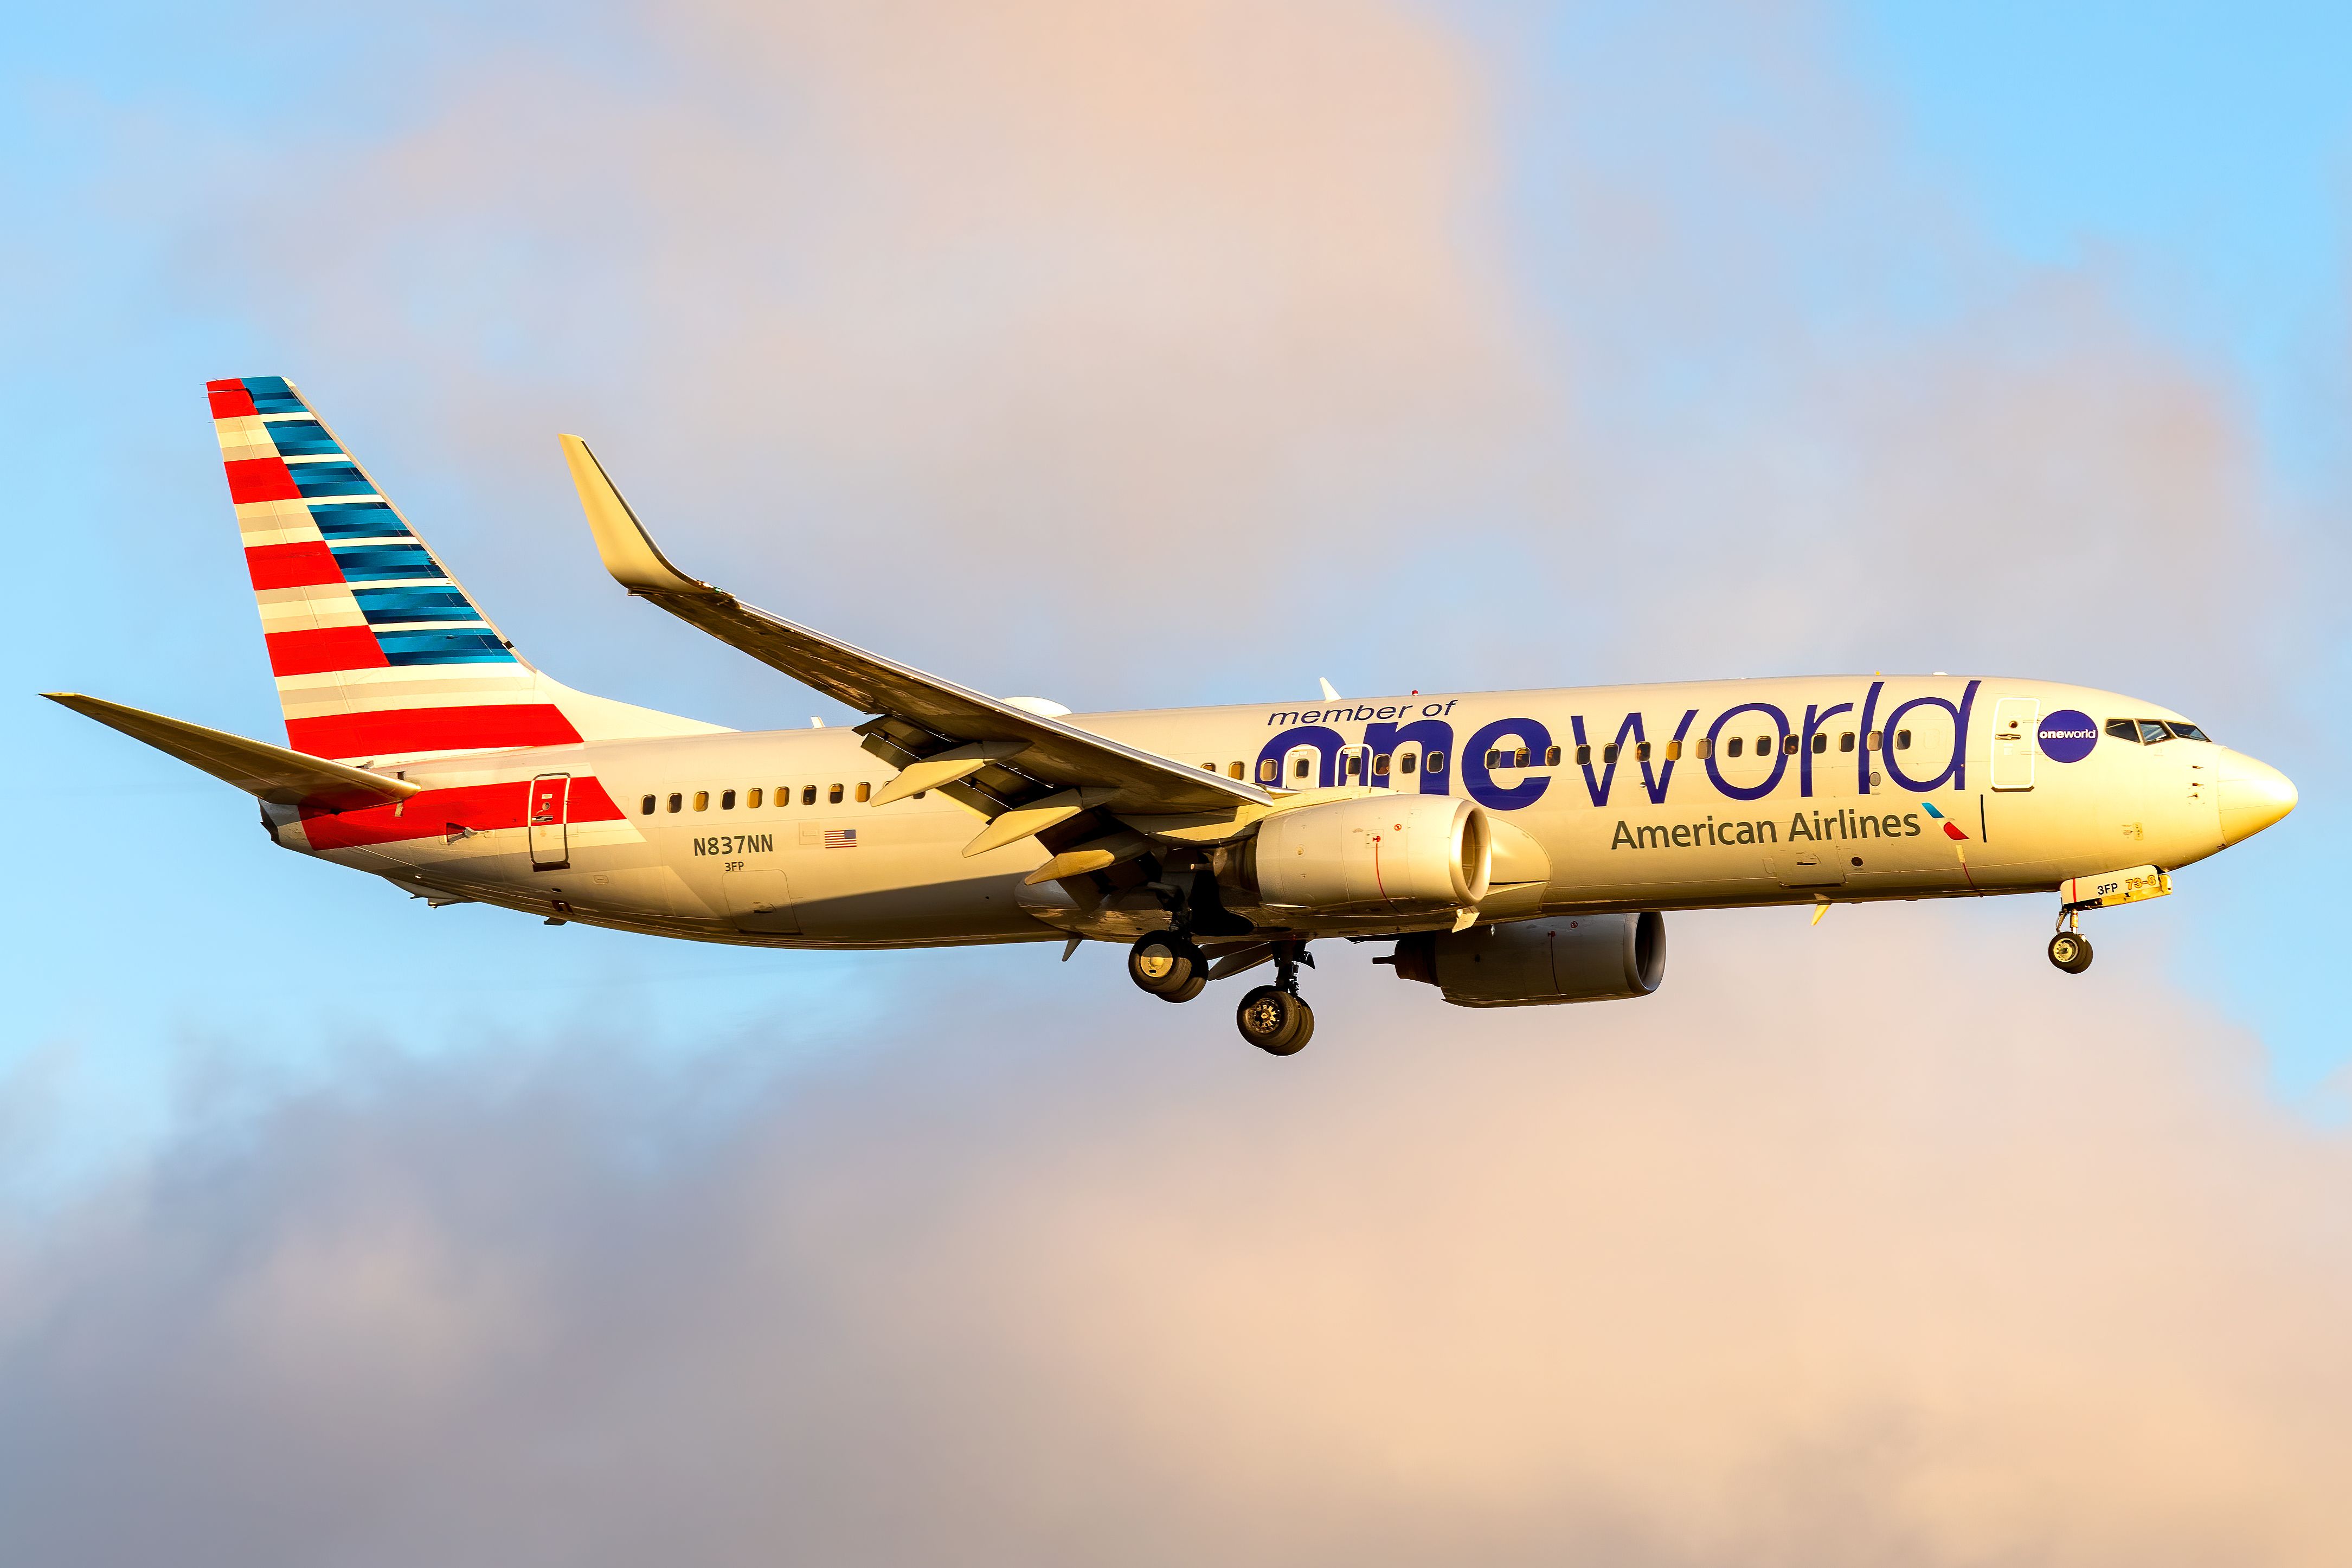 An American Airlines Boeing 737 in oneworld livery flying in the sky.